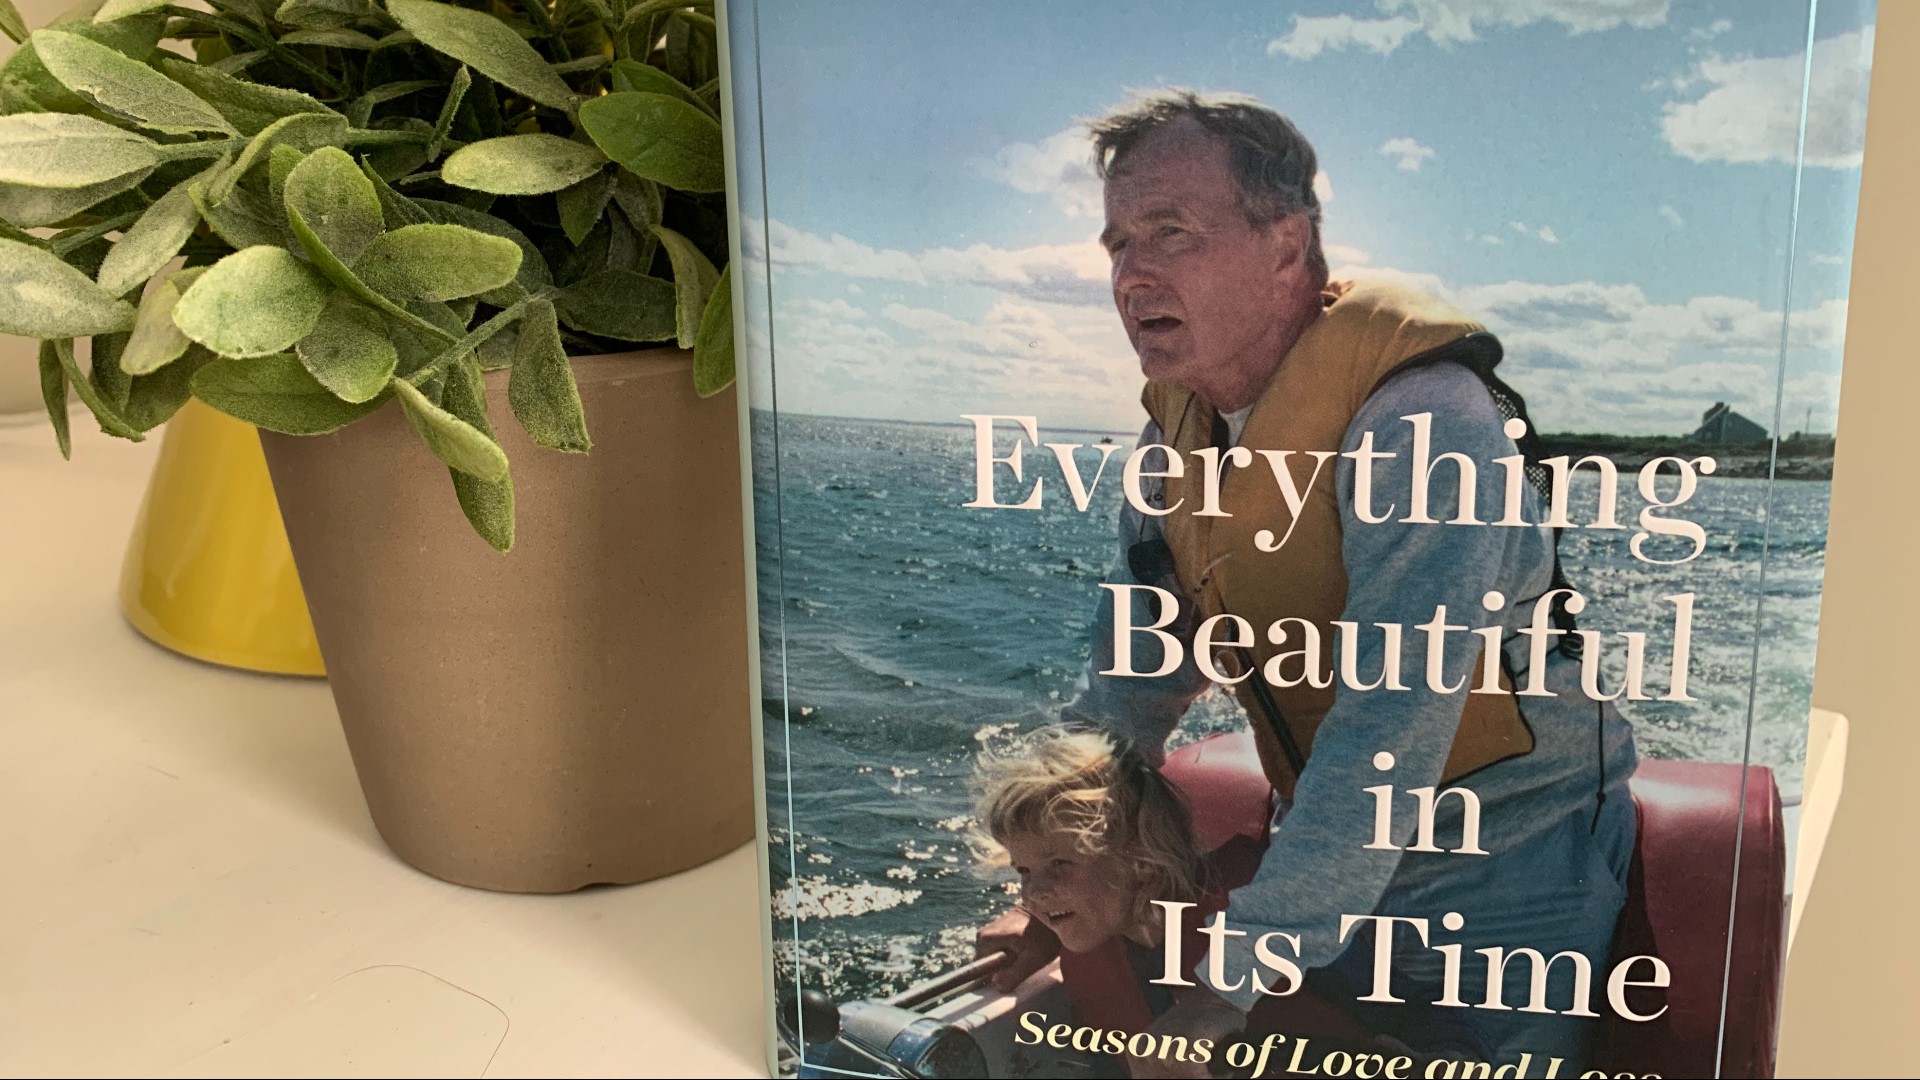 Jenna Bush Hager's sixth book explores the life lessons both sets of her grandparents taught her, including George and Barabara Bush.